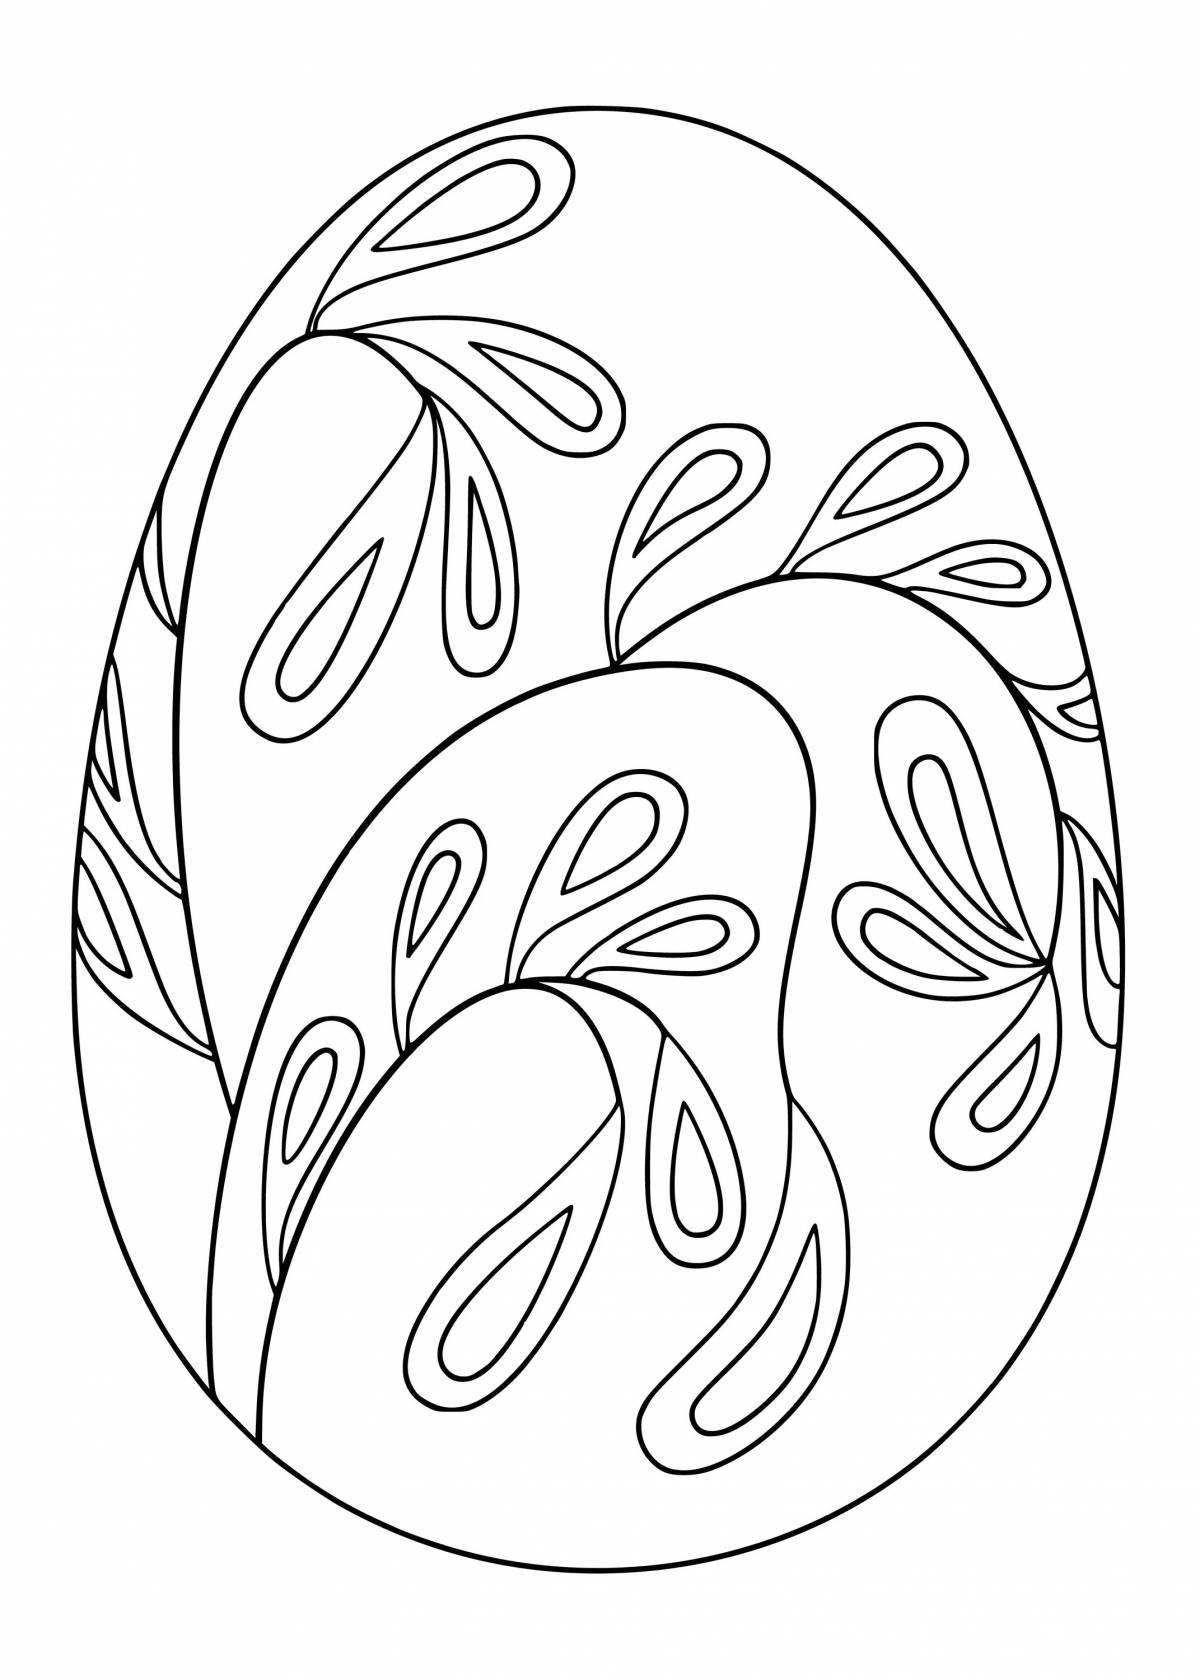 Gorgeous easter egg coloring page